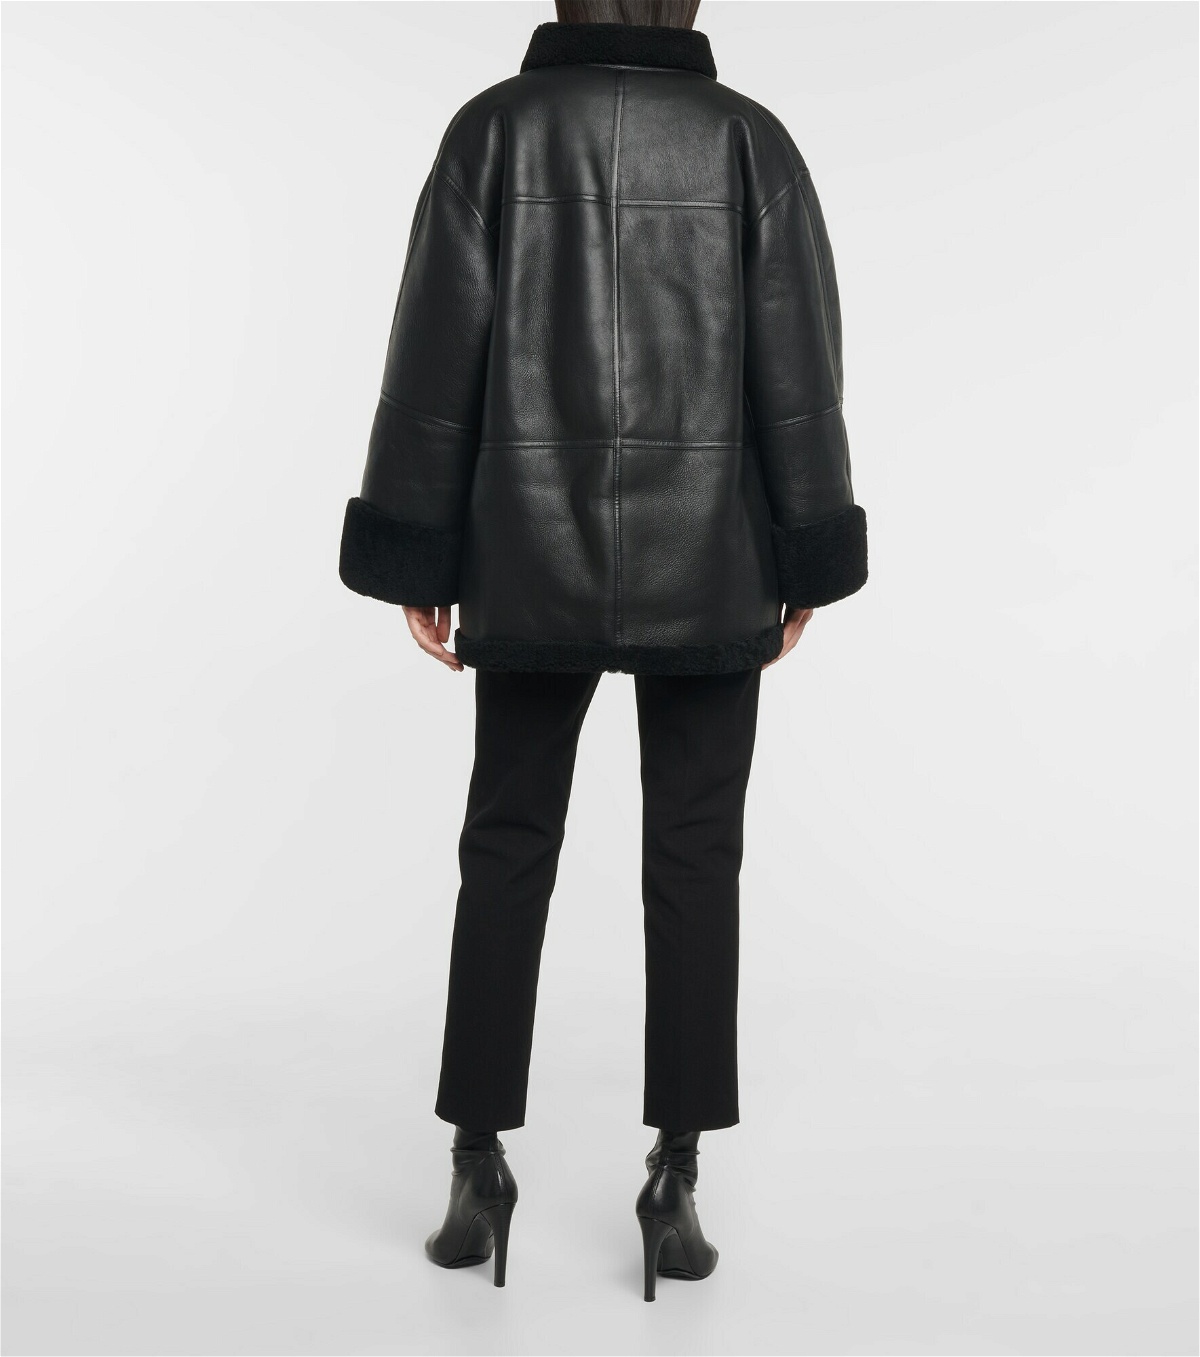 Toteme - Shearling-lined leather jacket Toteme